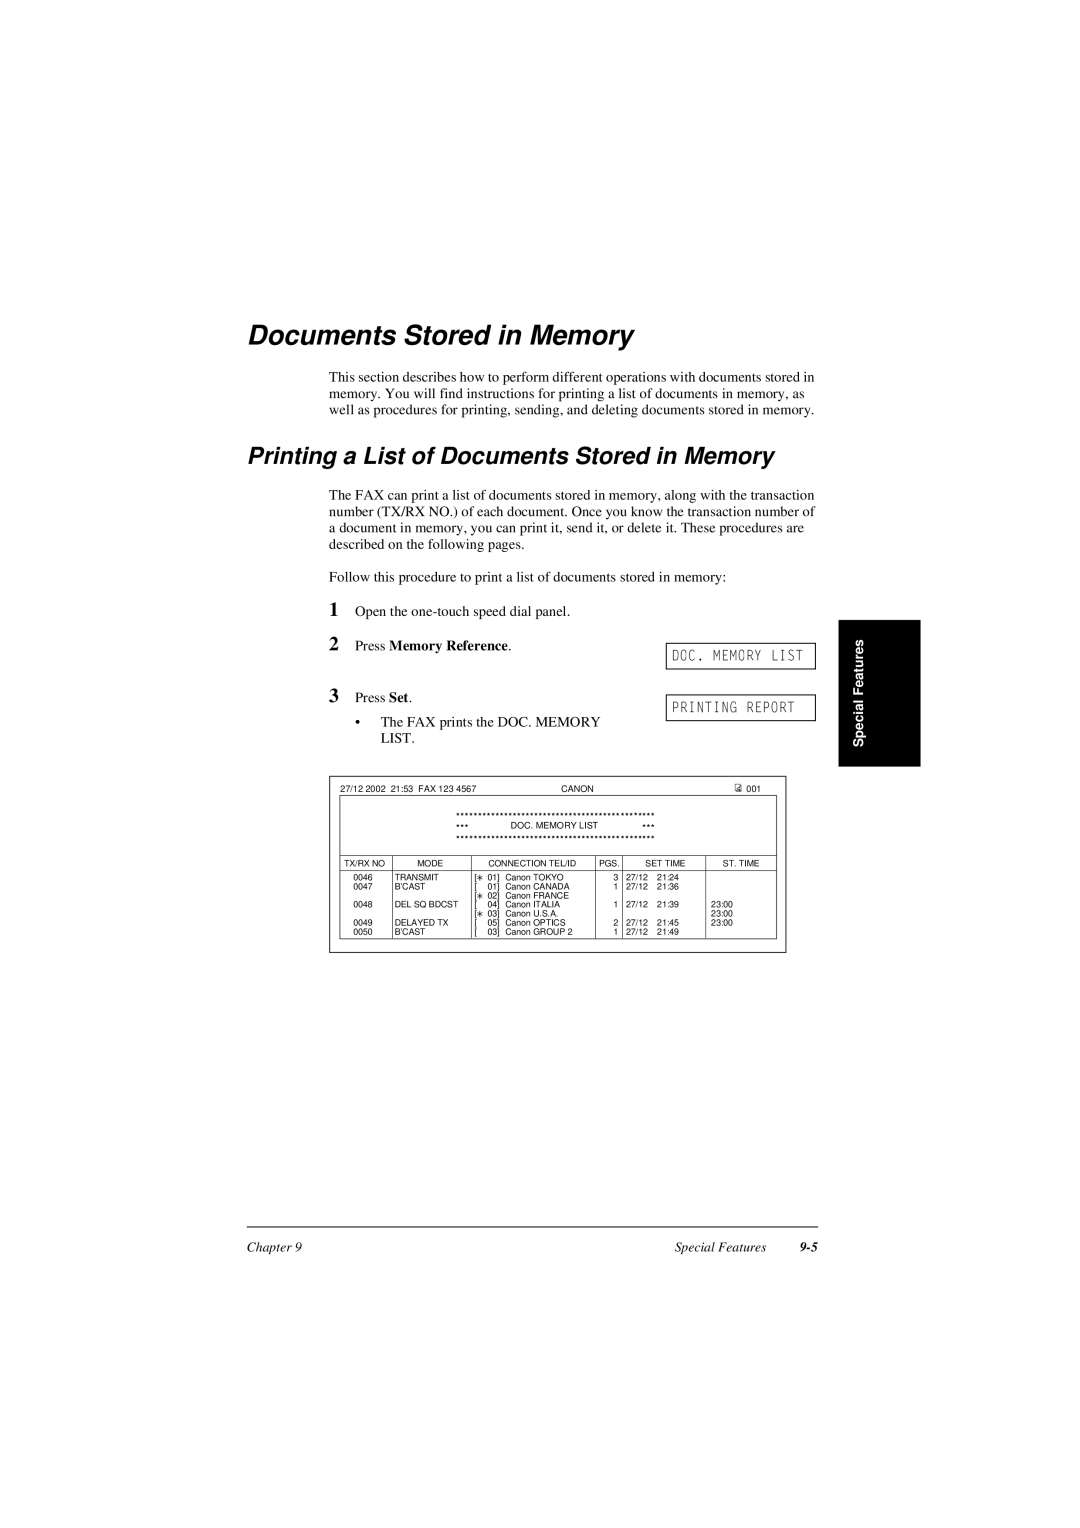 Canon L240, L290 manual Printing a List of Documents Stored in Memory, Press Memory Reference 